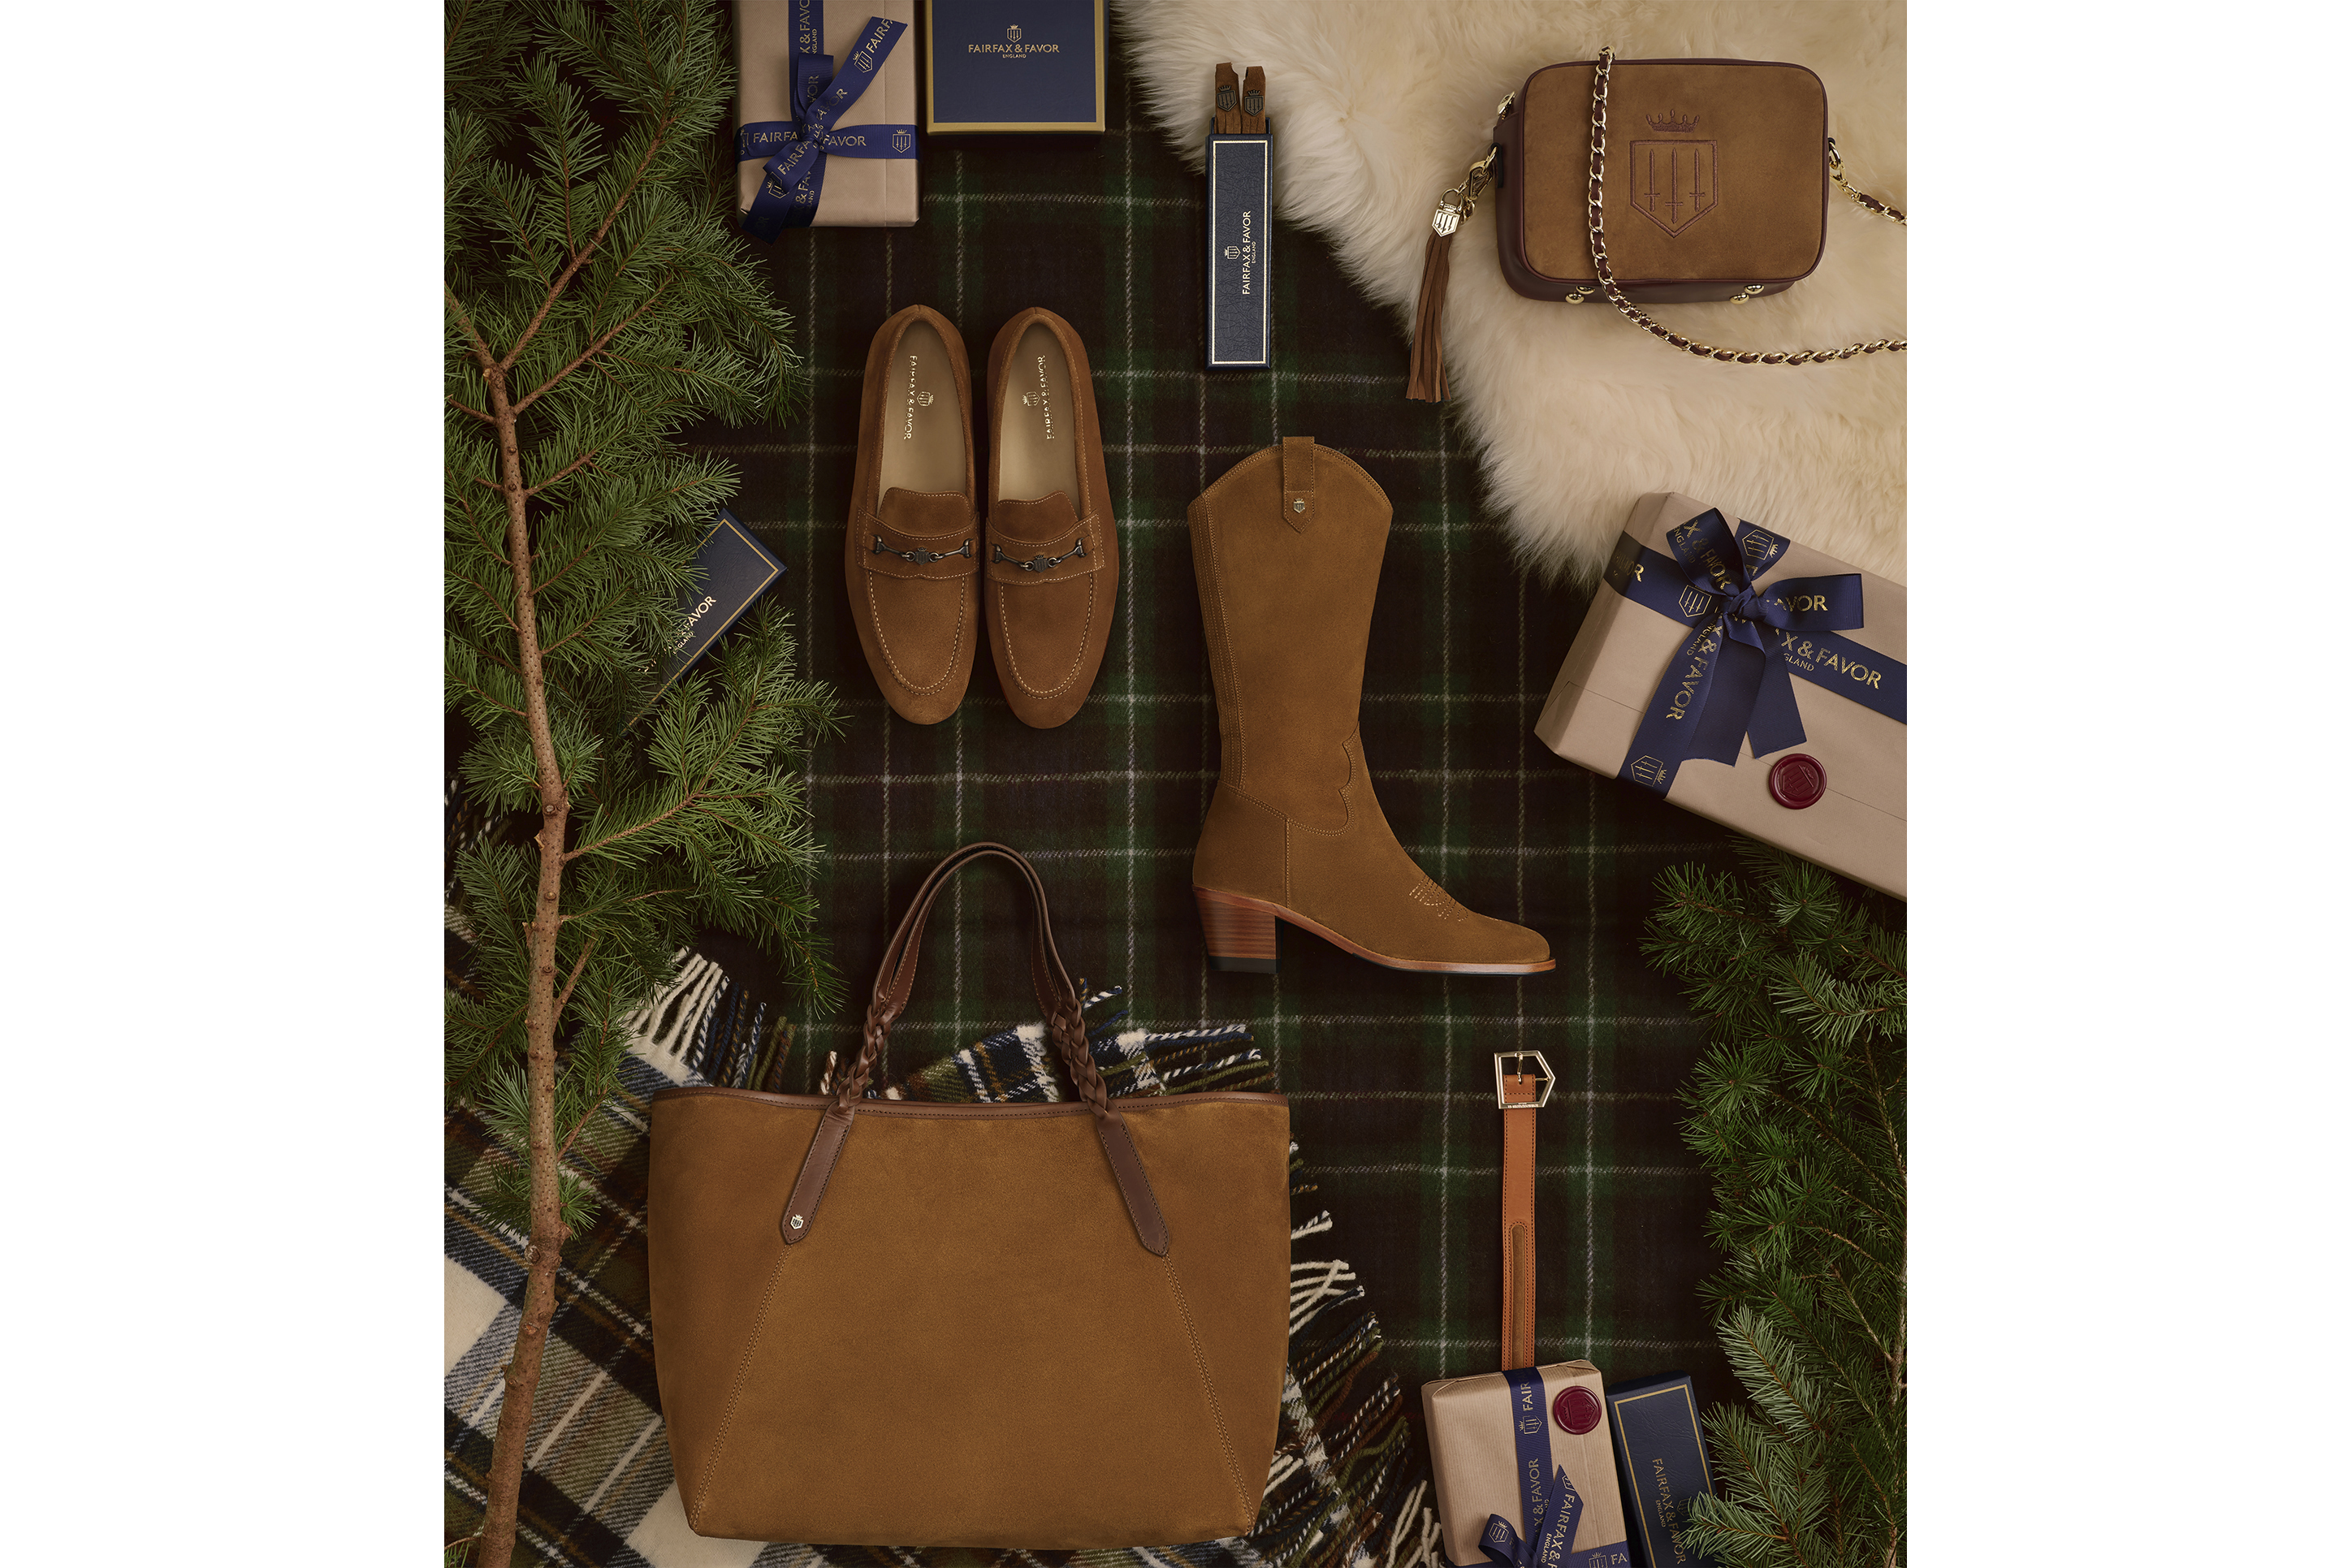 Flat lay photo shoot with shoes handbags and Christmas Presents laying down on a rug